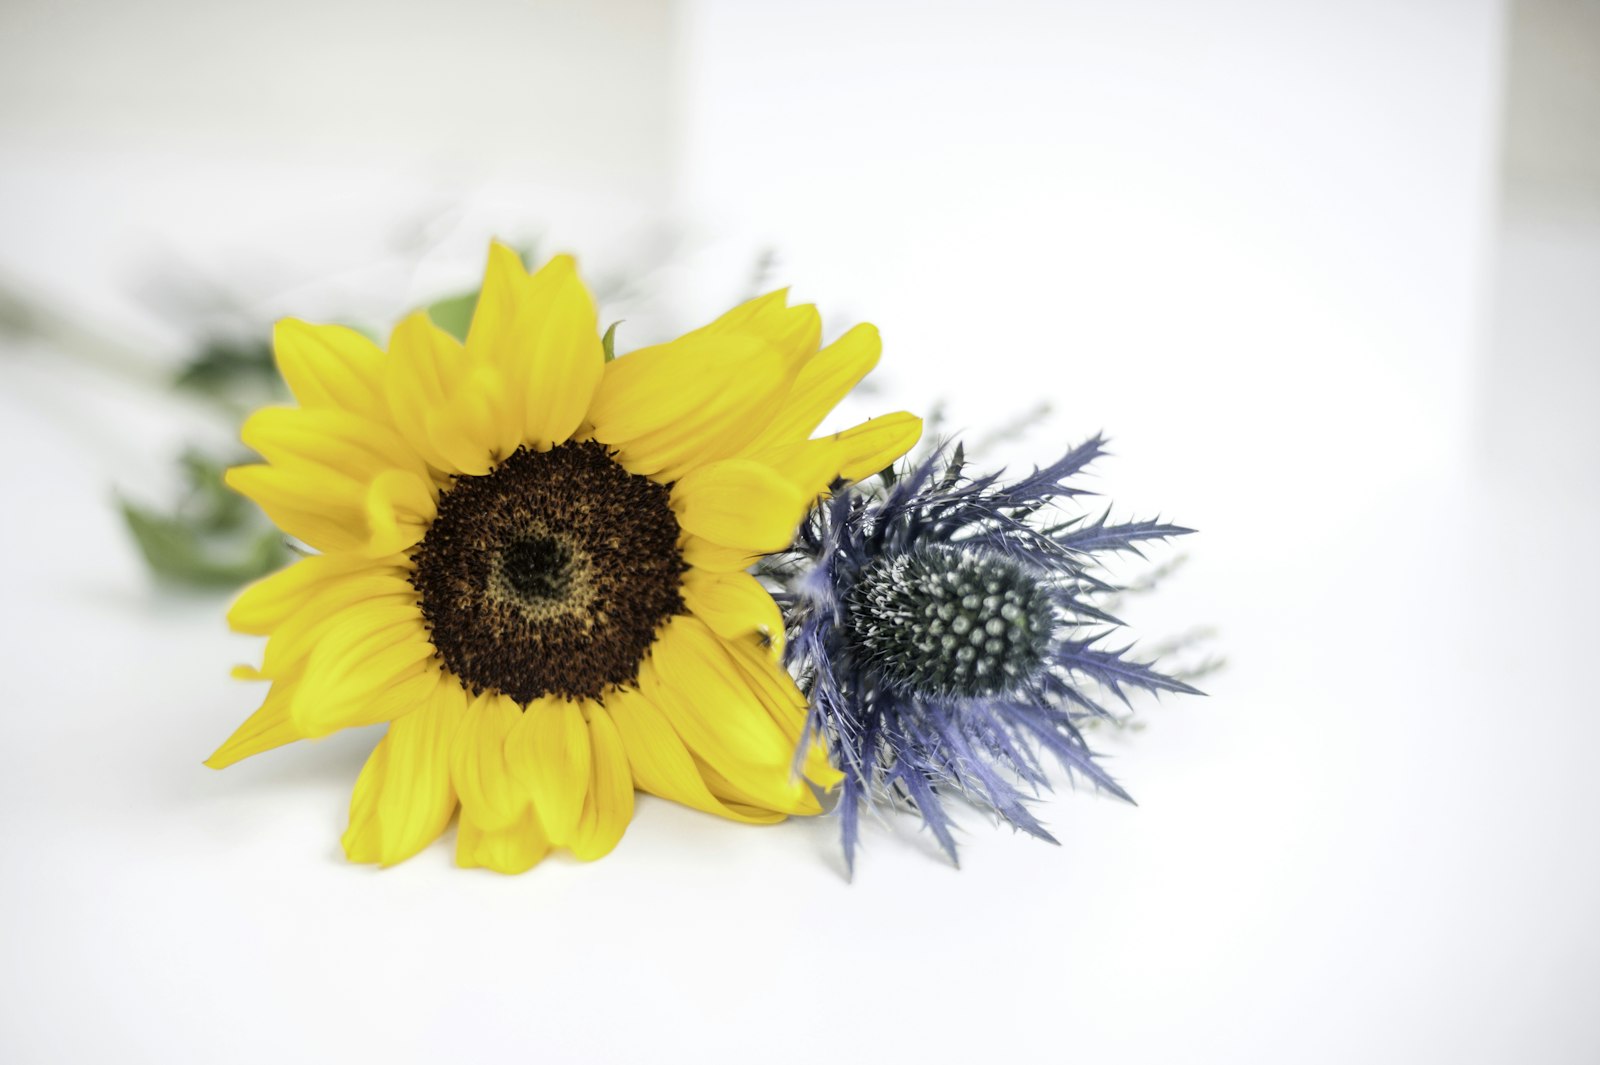 Nikon D700 + Nikon AF Nikkor 50mm F1.4D sample photo. Yellow sunflower in close photography